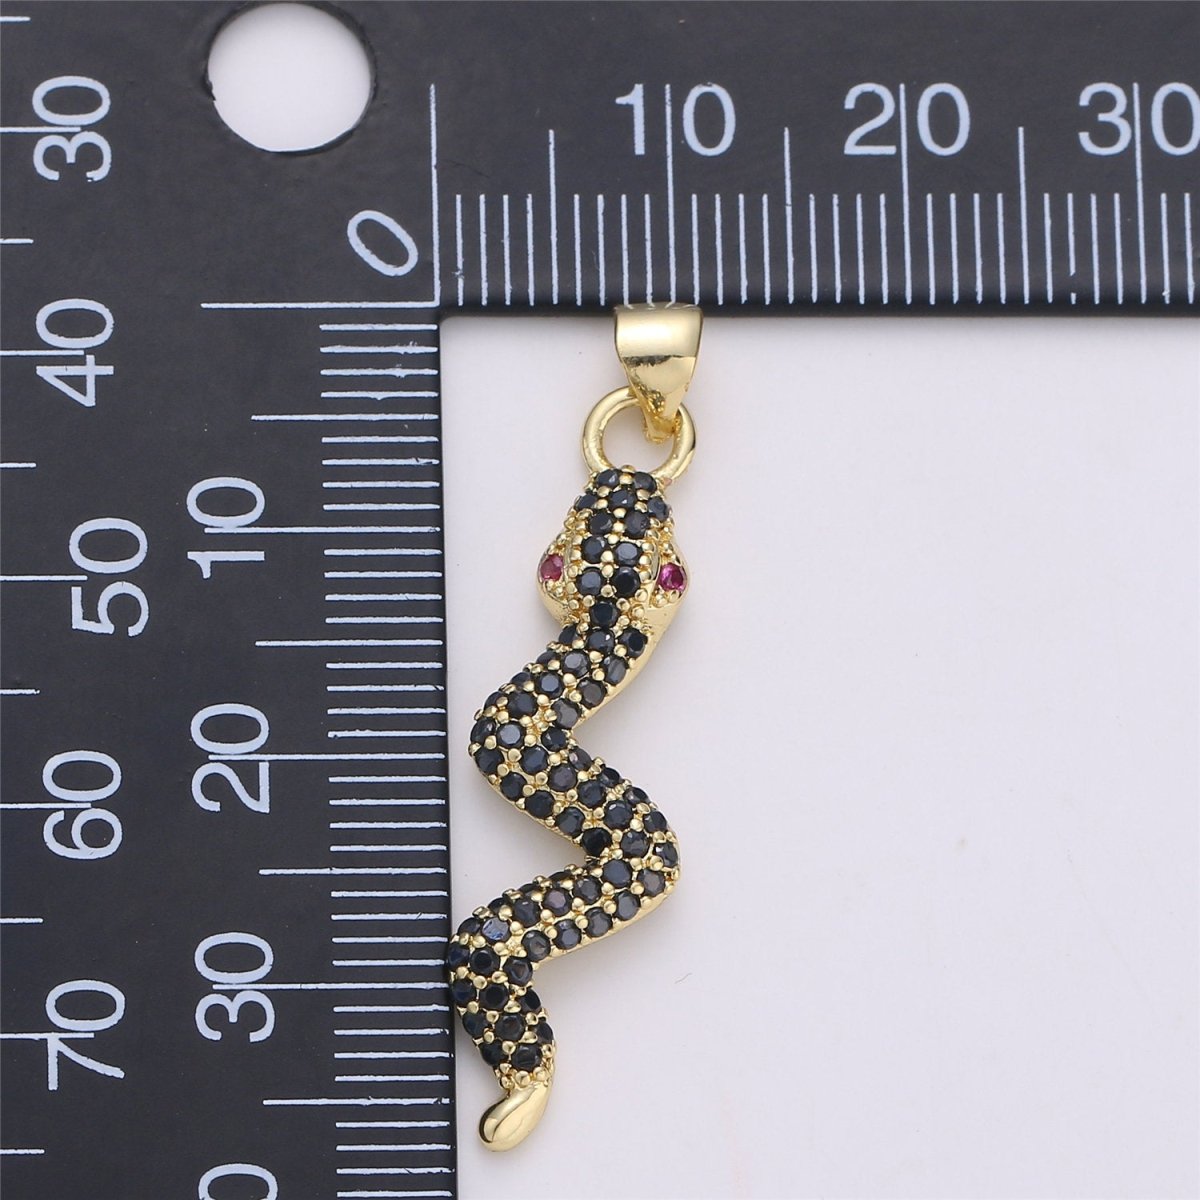 24K Gold Filled Dainty Black Snake Pendant with Micro Pave Pink Cubic Zirconia CZ Stone for Necklace or Bracelet I-573 - DLUXCA